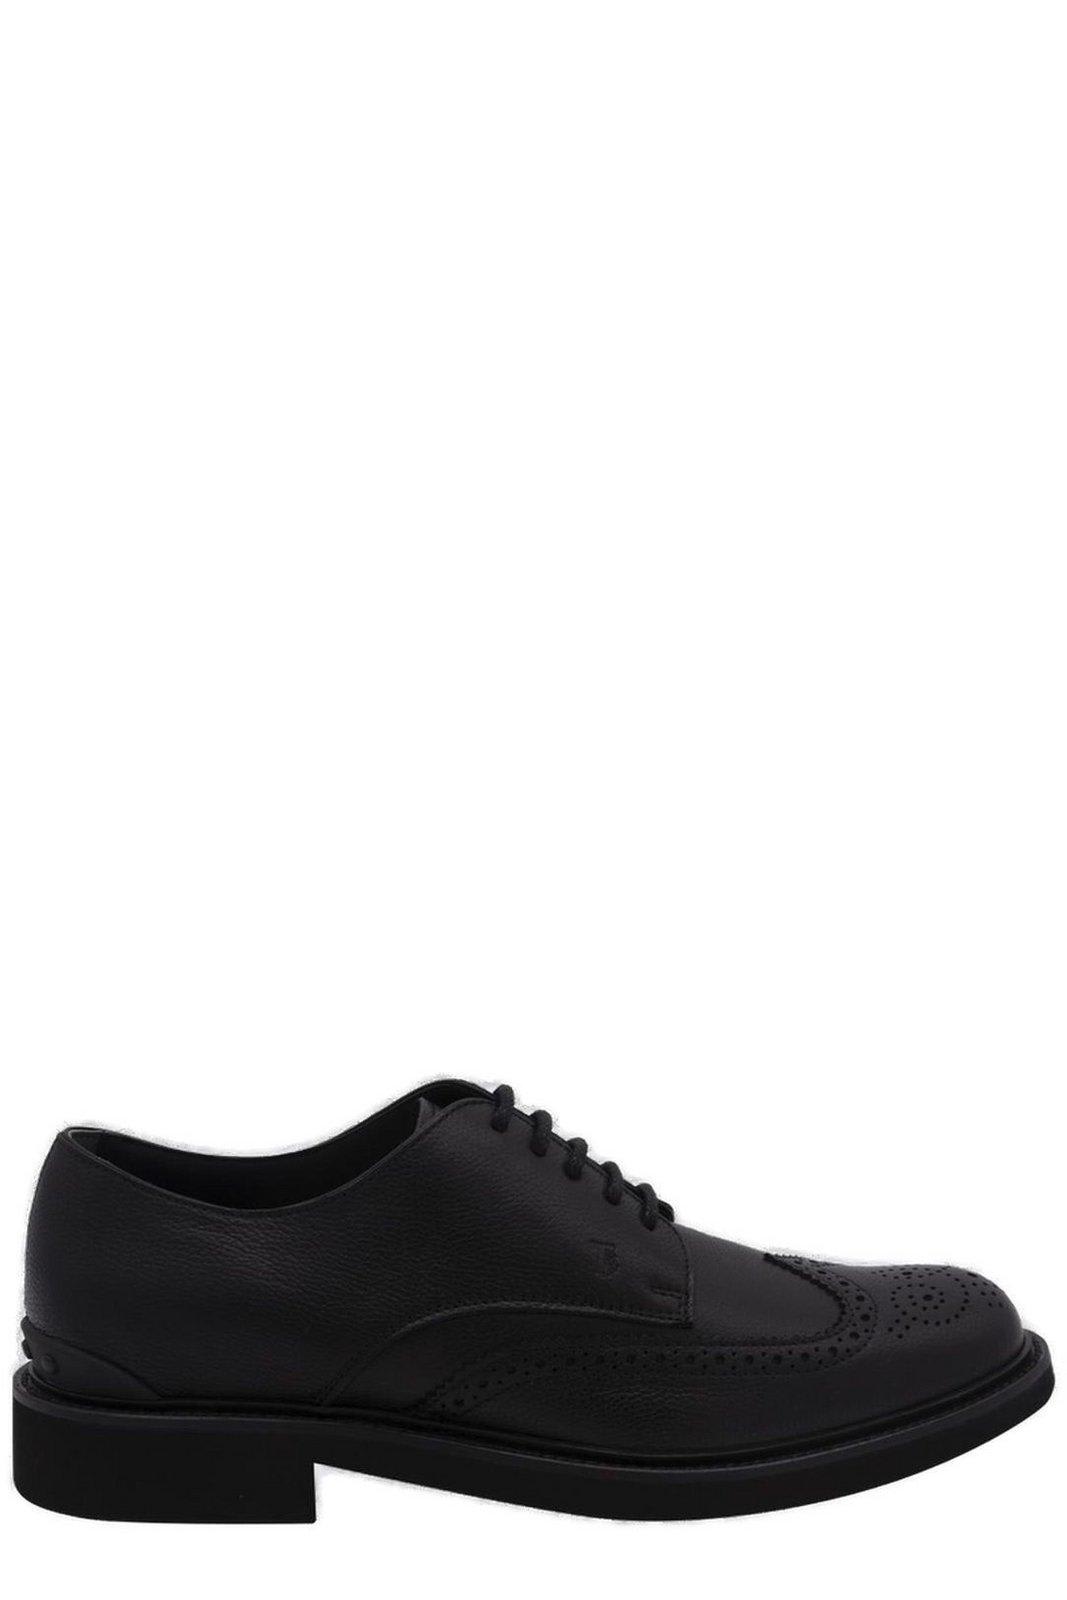 Tod's Perforated Detail Lace-up Shoes